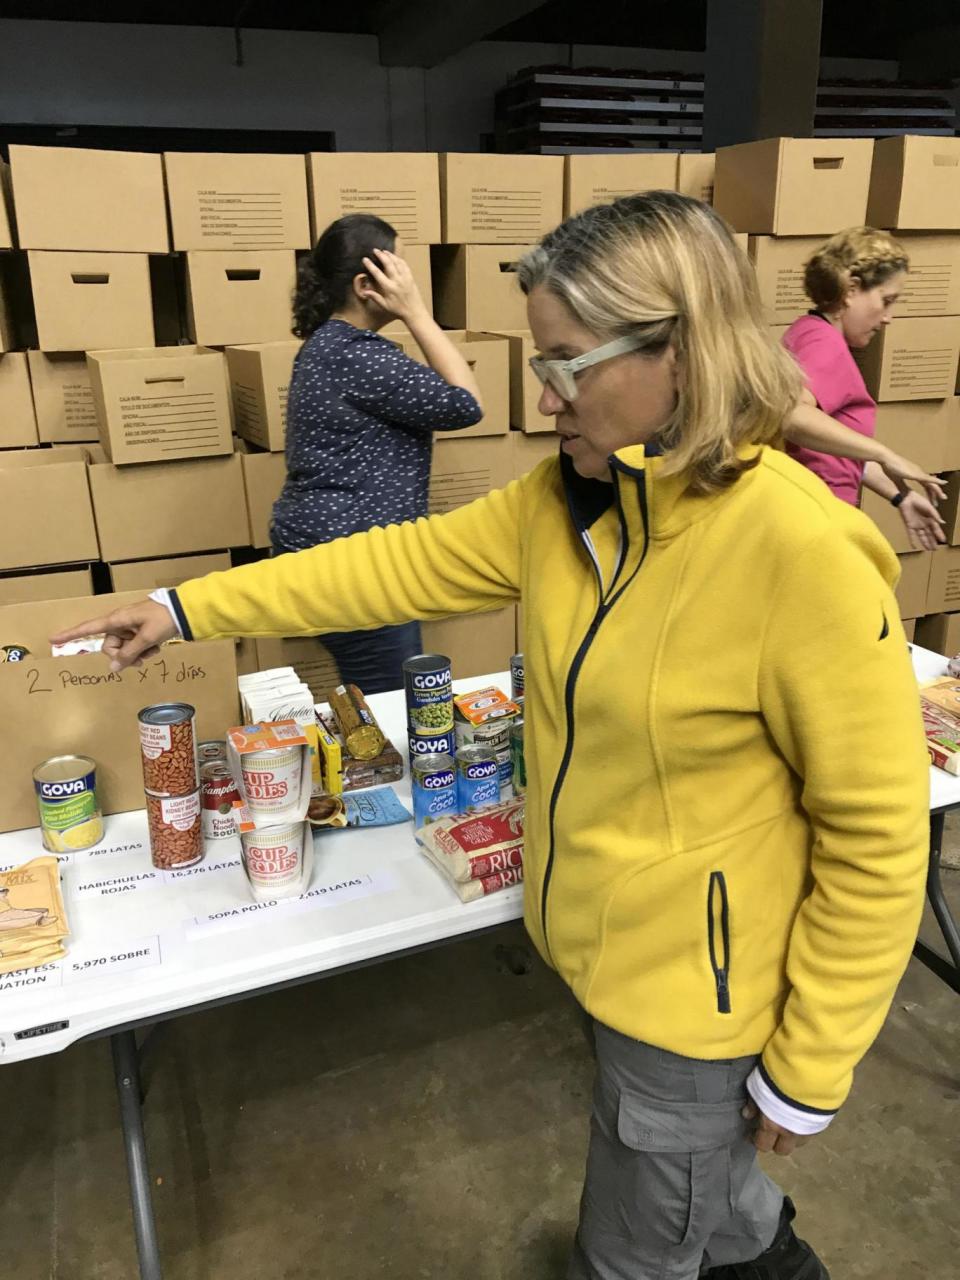 Mayor Carmen Yulin inspects donated food rations at the Coloseo Roberto Clemente in San Juanon the eve of President Trump's visit (David Usborne)